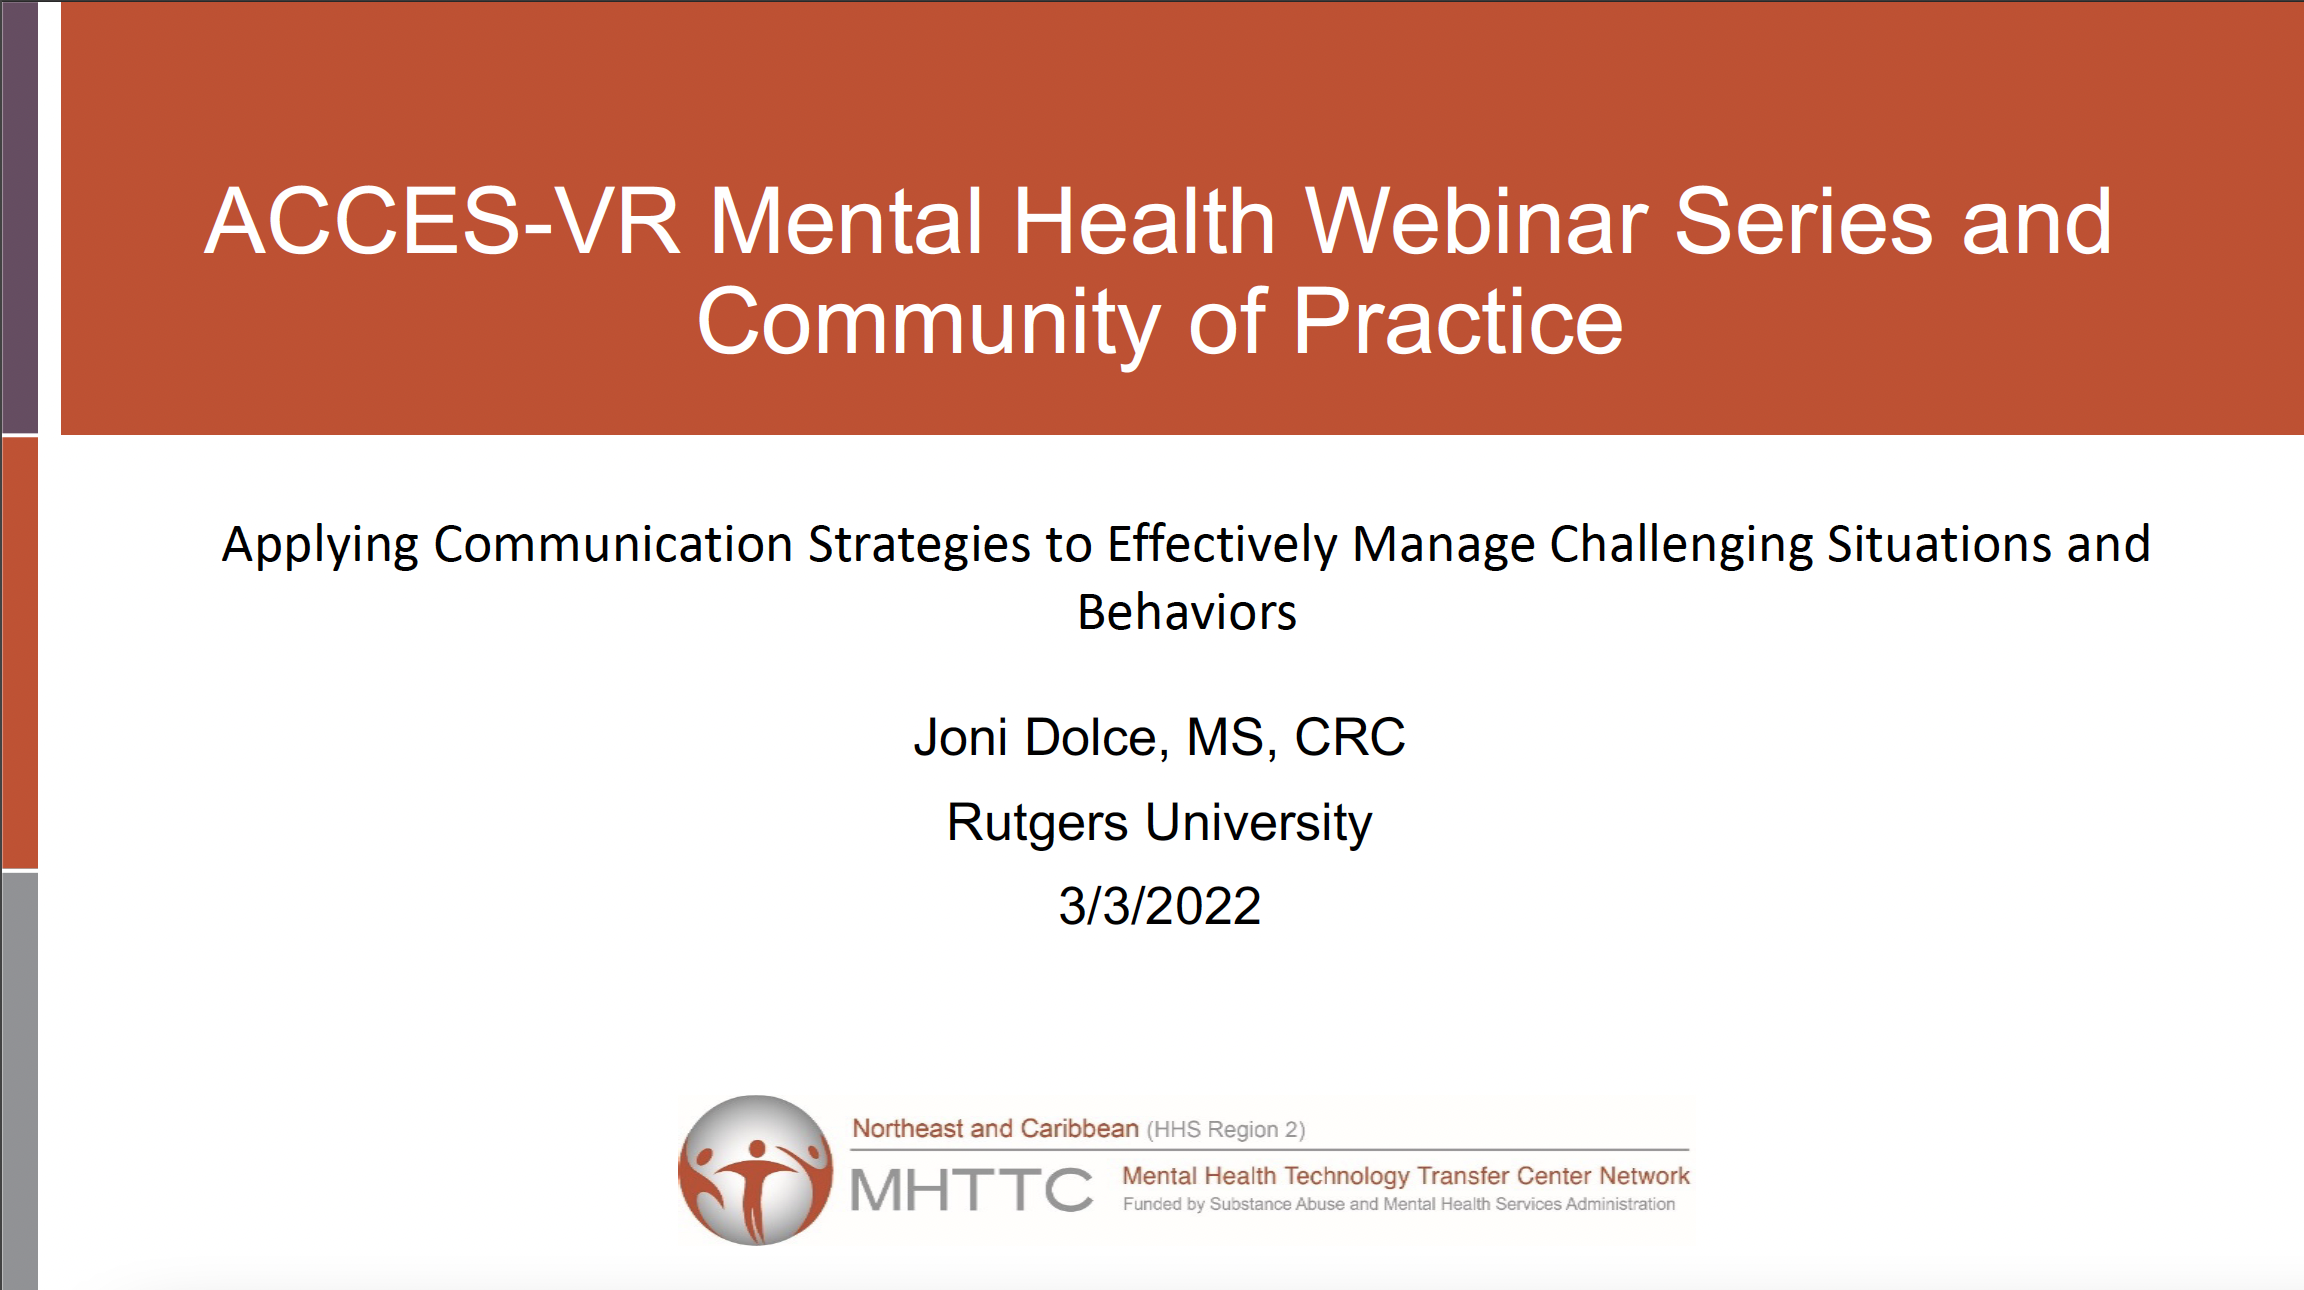 Screen shot of title slide. "ACCES-VR Mental Health Webinar Series and Community of Practice: Session 5: Applying Communication Strategies to Effectively Manage Challenging Situations and Behaviors